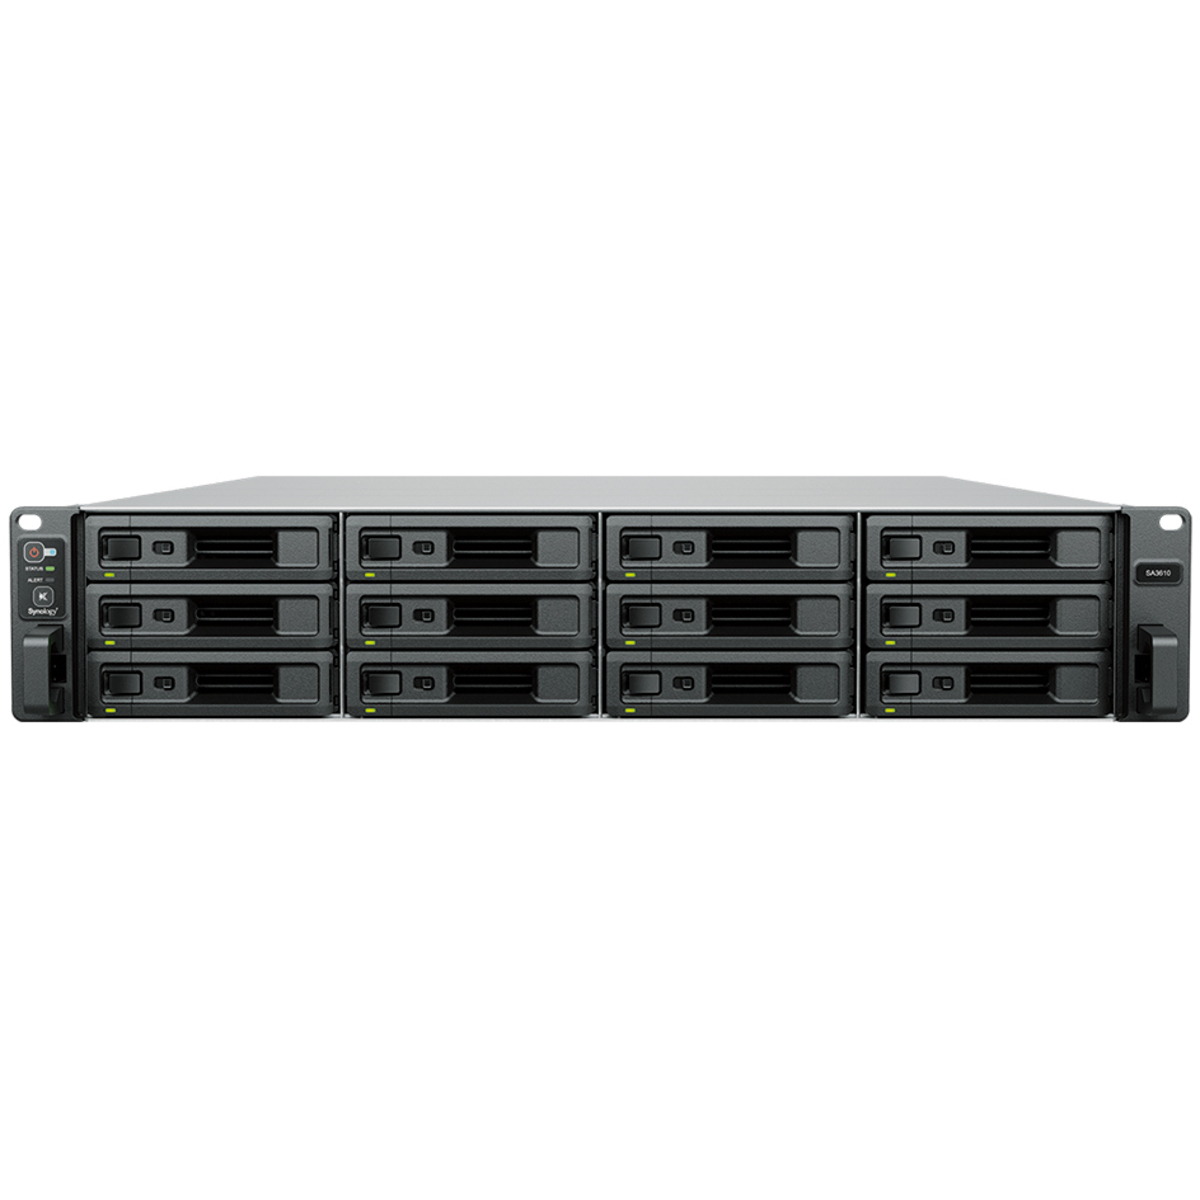 Synology RackStation SA3410 16tb 12-Bay RackMount Large Business / Enterprise NAS - Network Attached Storage Device 8x2tb Western Digital Red Plus WD20EFZX 3.5 5400rpm SATA 6Gb/s HDD NAS Class Drives Installed - Burn-In Tested RackStation SA3410